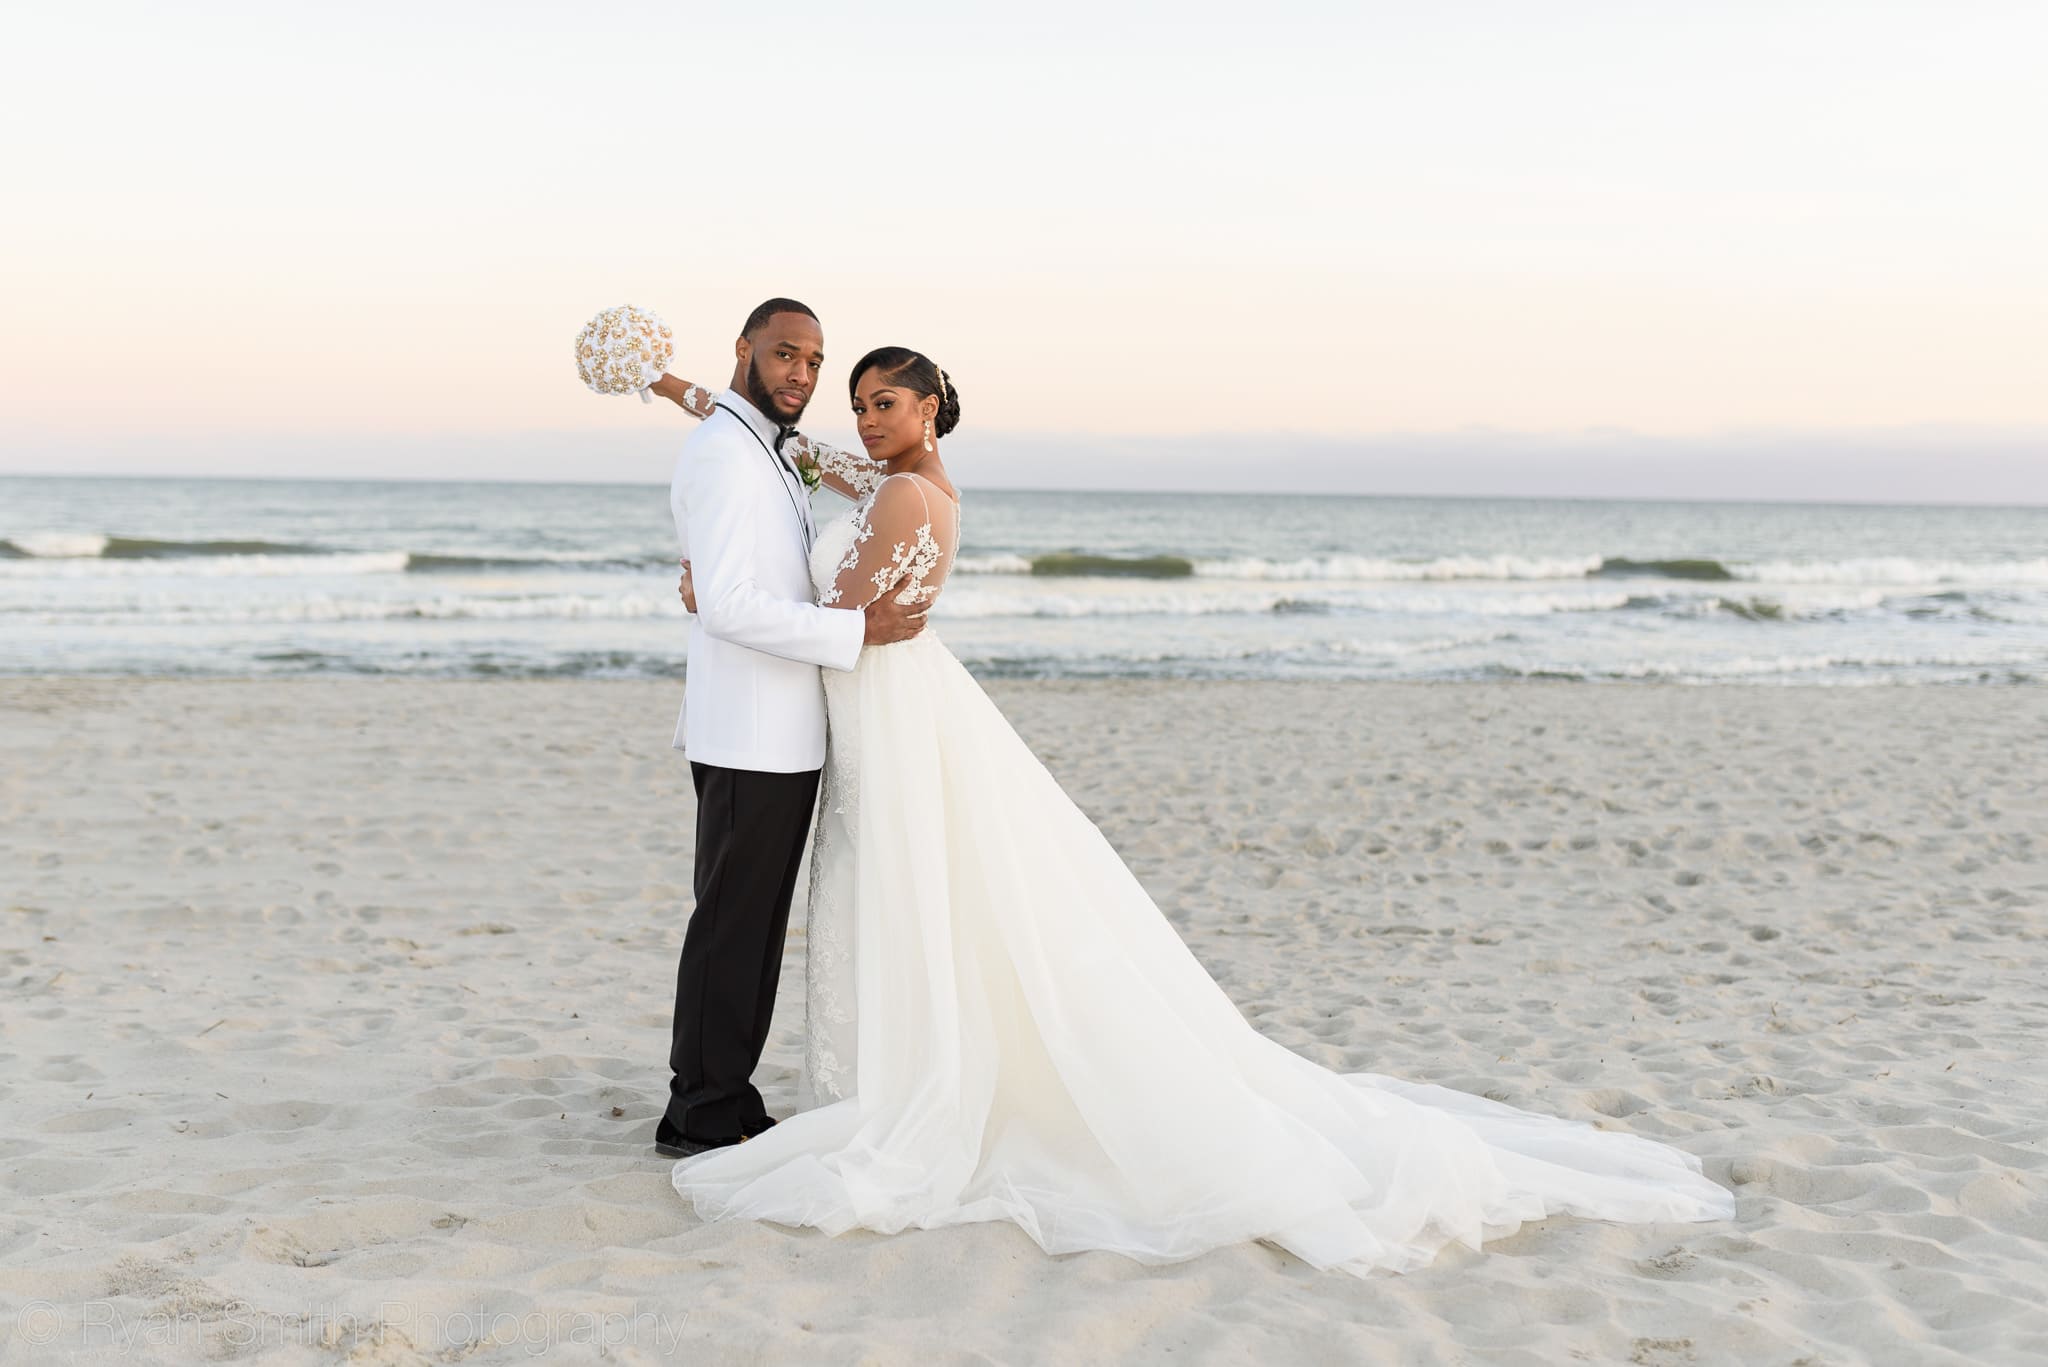 Bride and groom standing in front of ocean - Doubletree Resort by Hilton Myrtle Beach